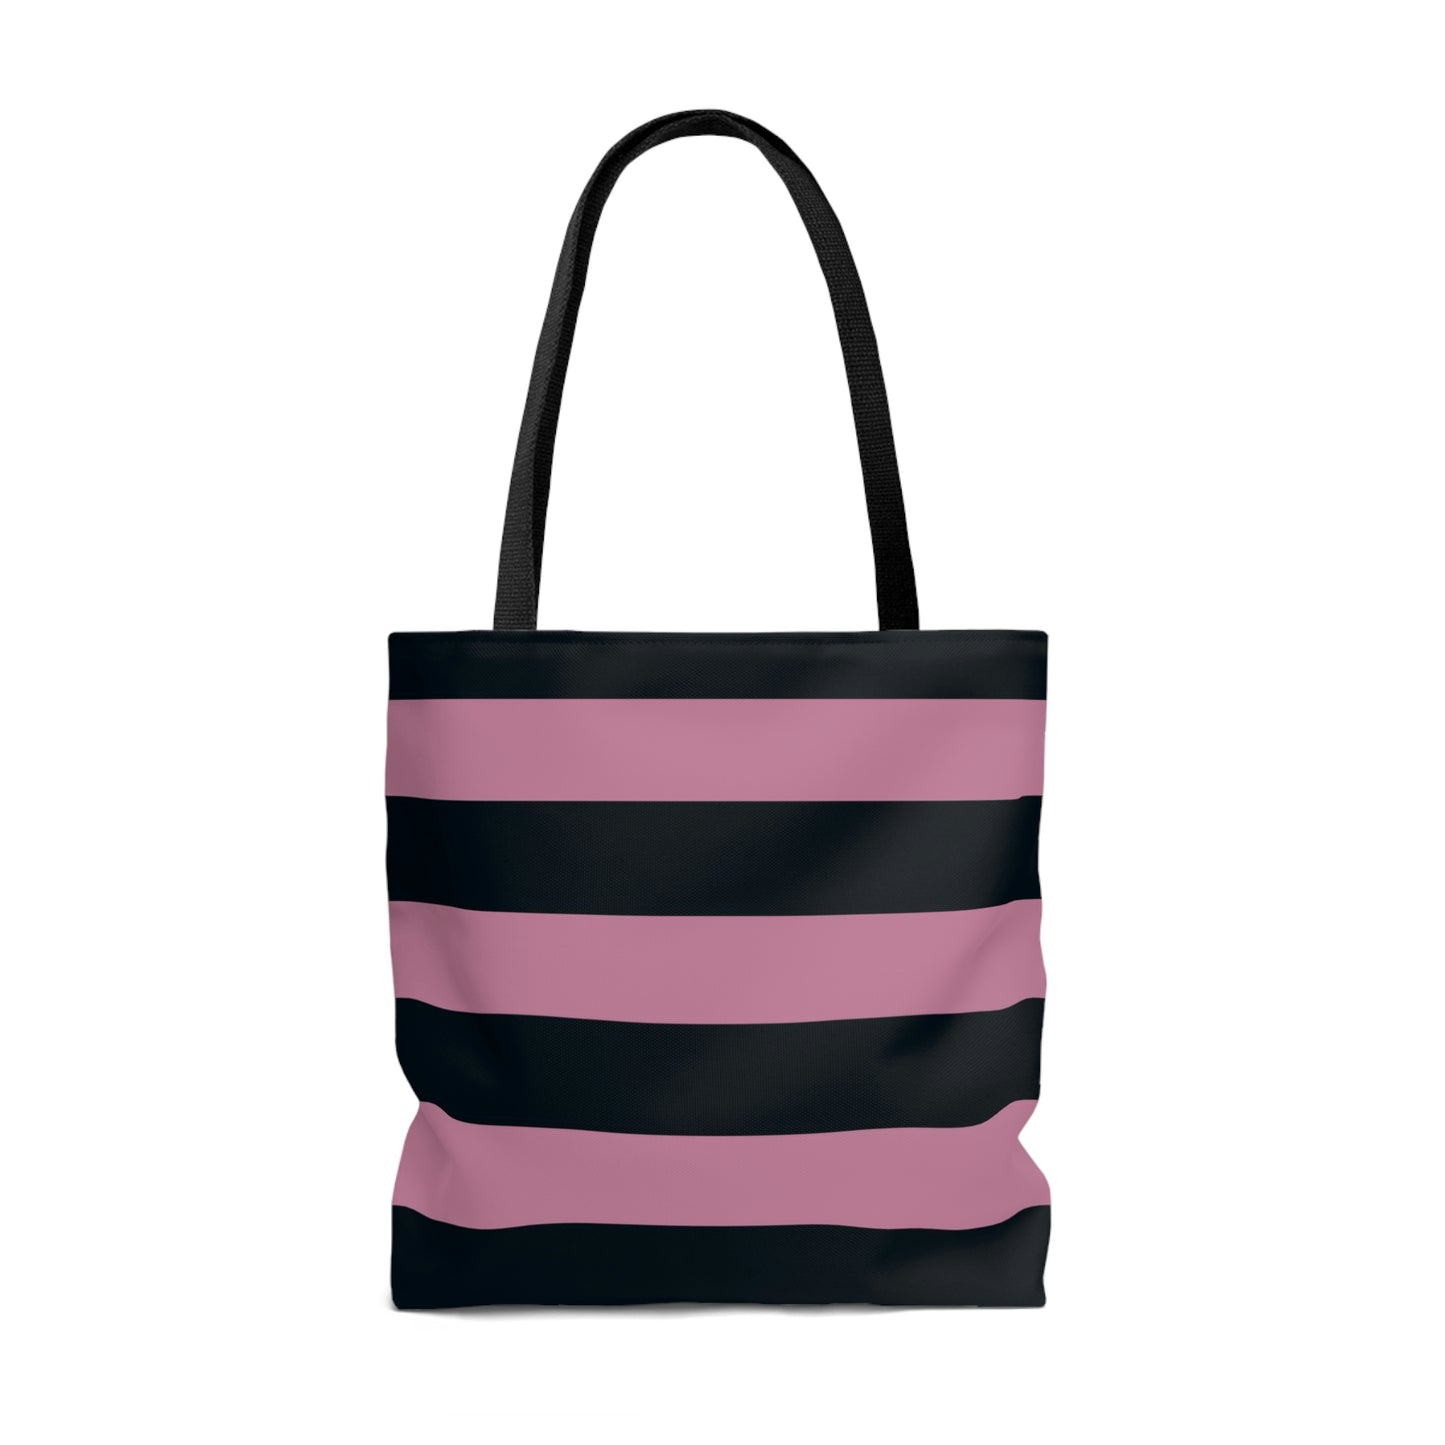 Lightweight Tote Bag - Dusty Rose Pink/Navy Stripes